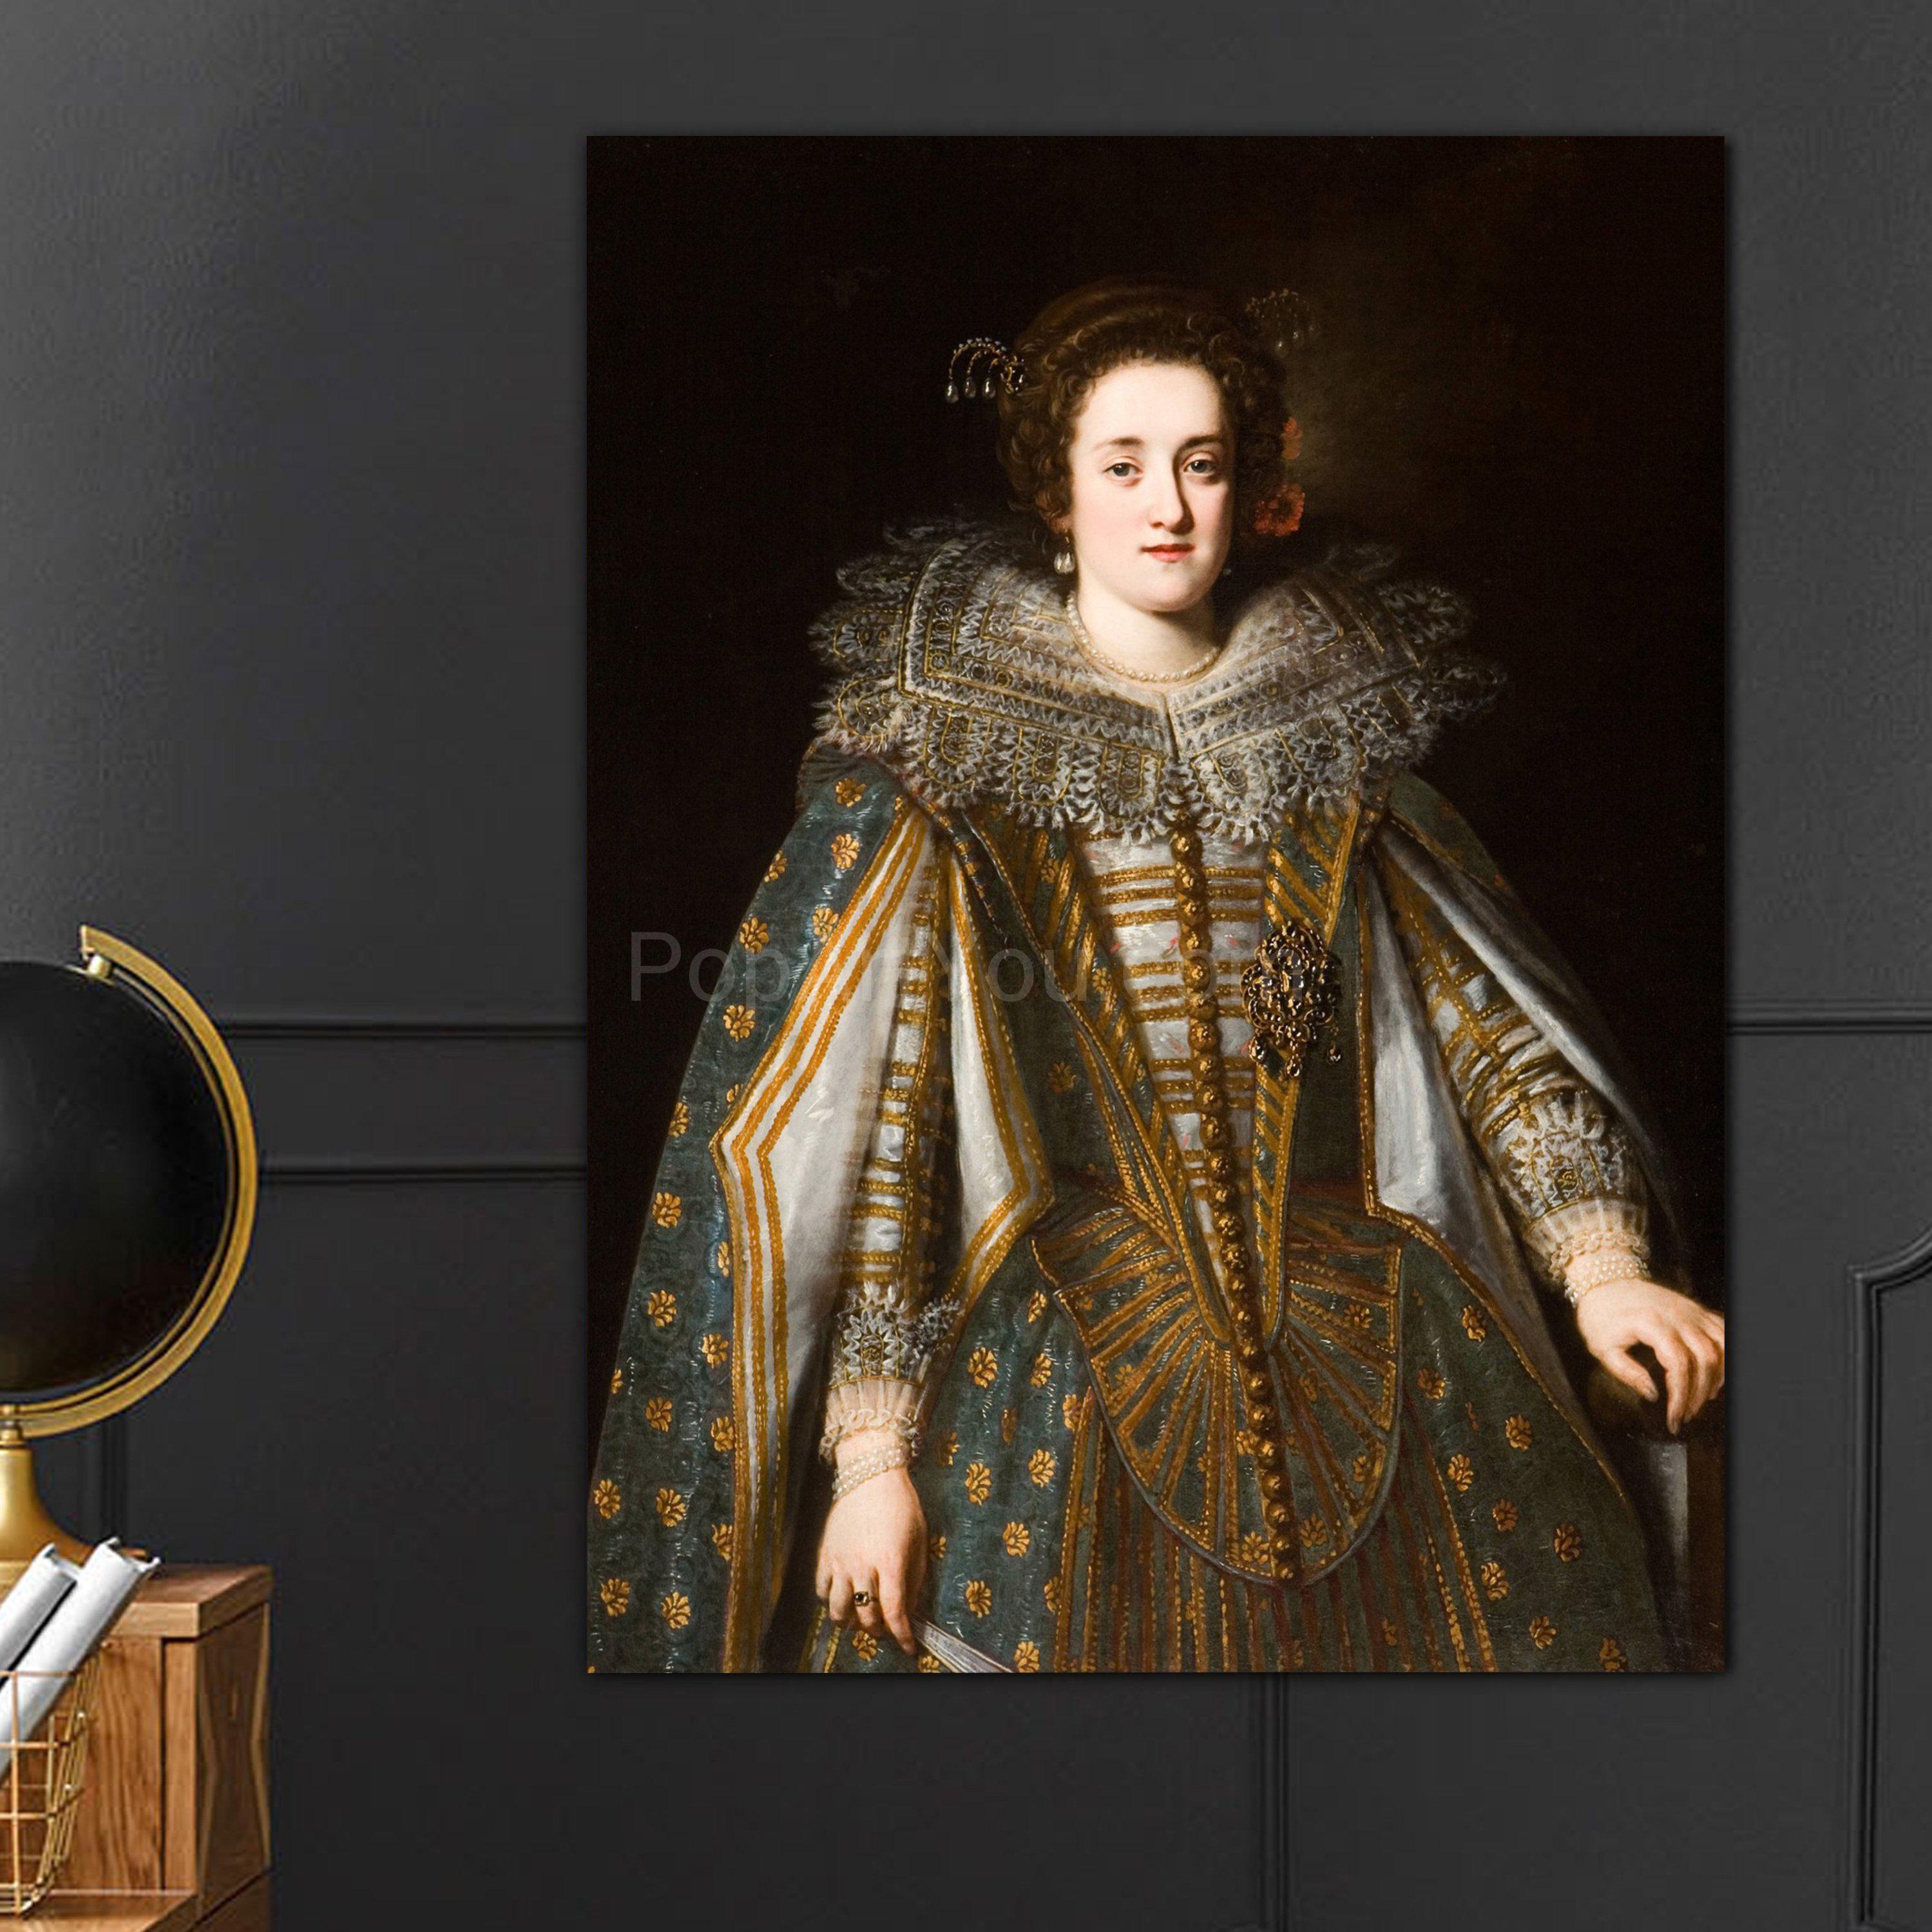 Portrait of a woman with red hair dressed in bronze regal attire hangs on a gray wall near the globe